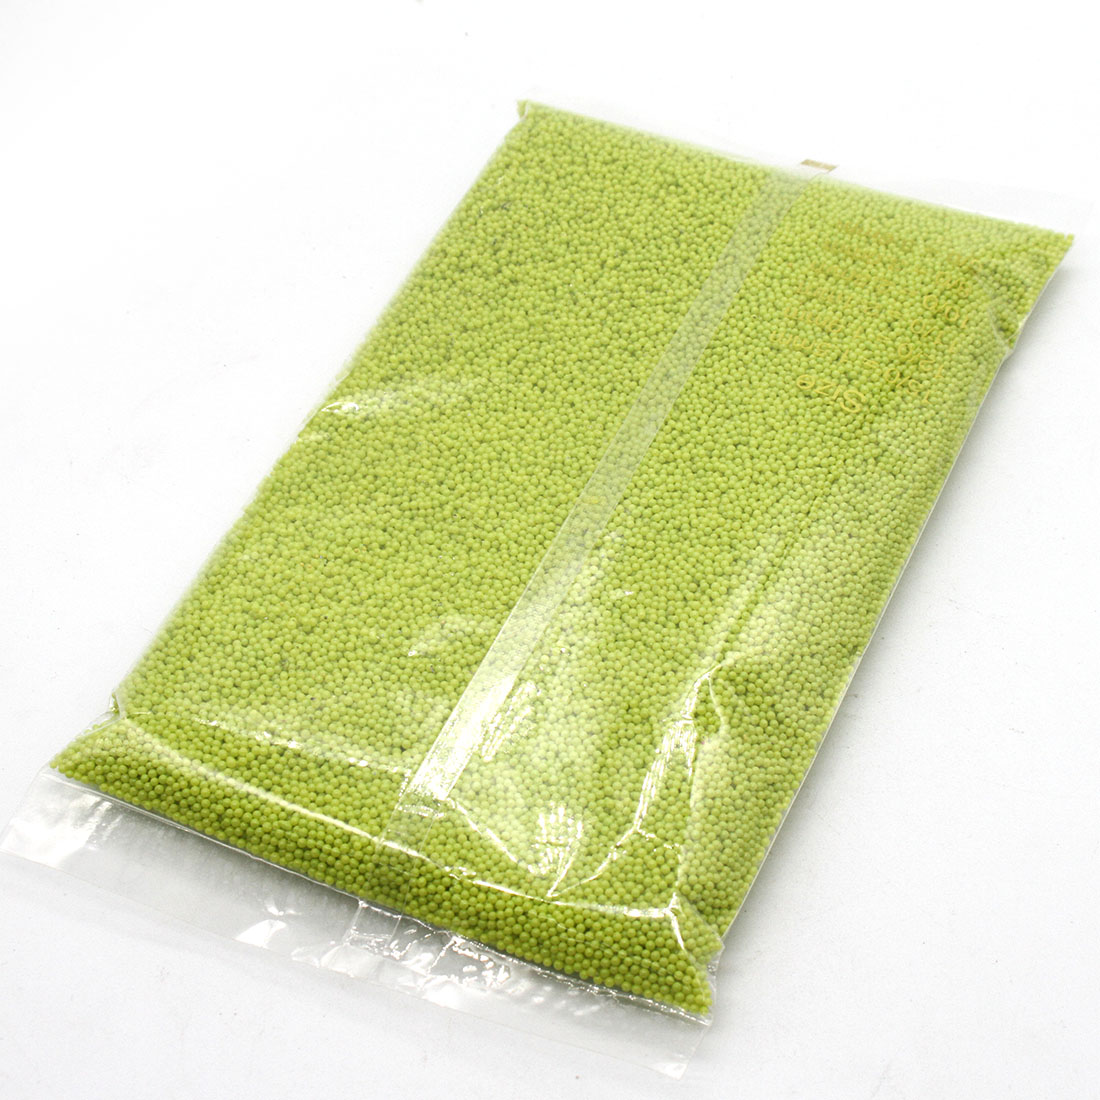 Apple green, 0.6 to 0.8 mm